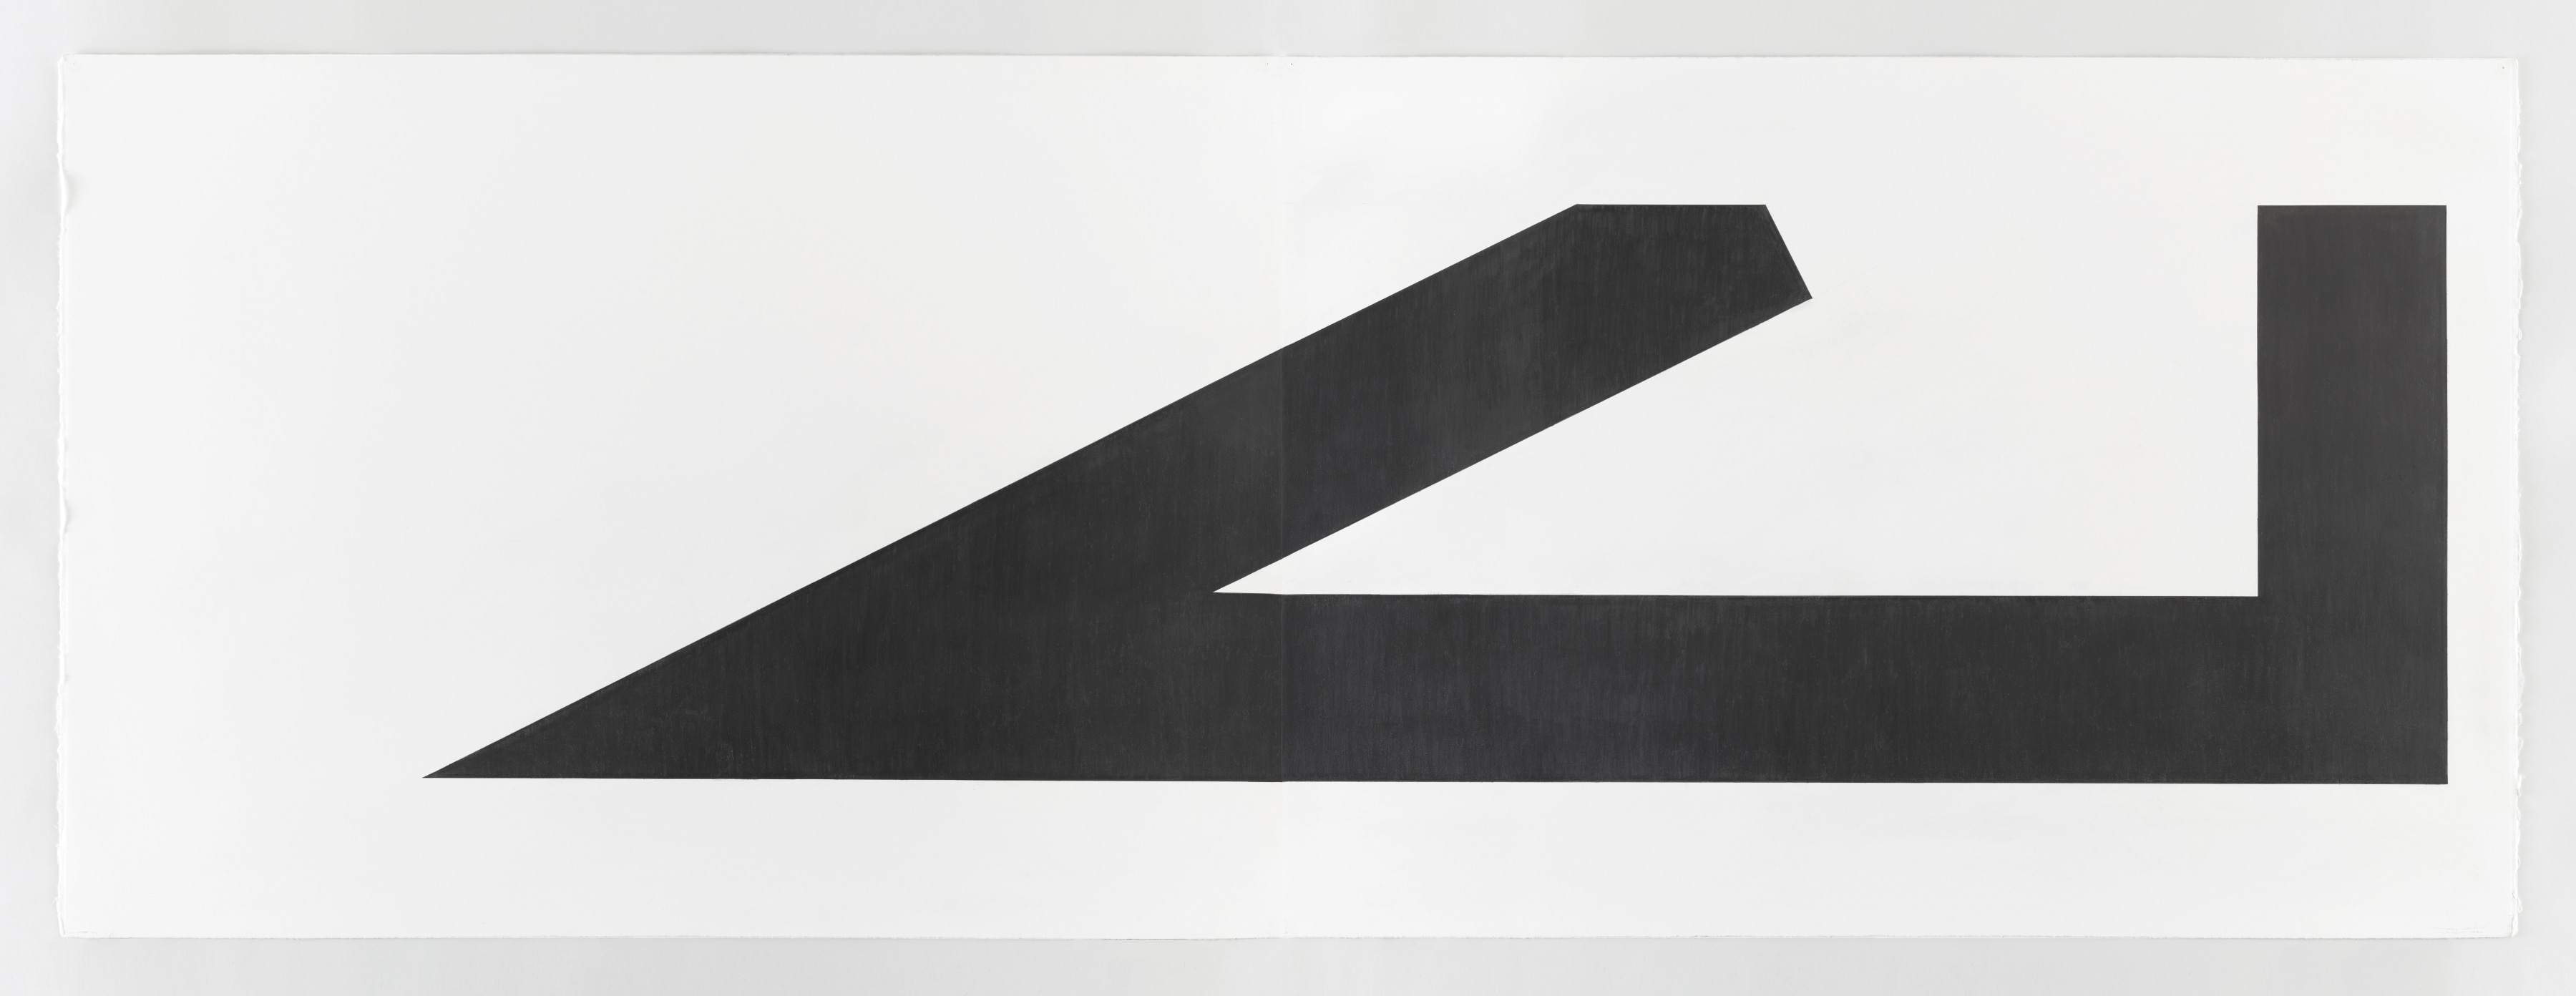 Ted Stamm, LWX-G-2 (Lo Wooster), 1980, graphite on paper, diptych, 30 x 85 inches